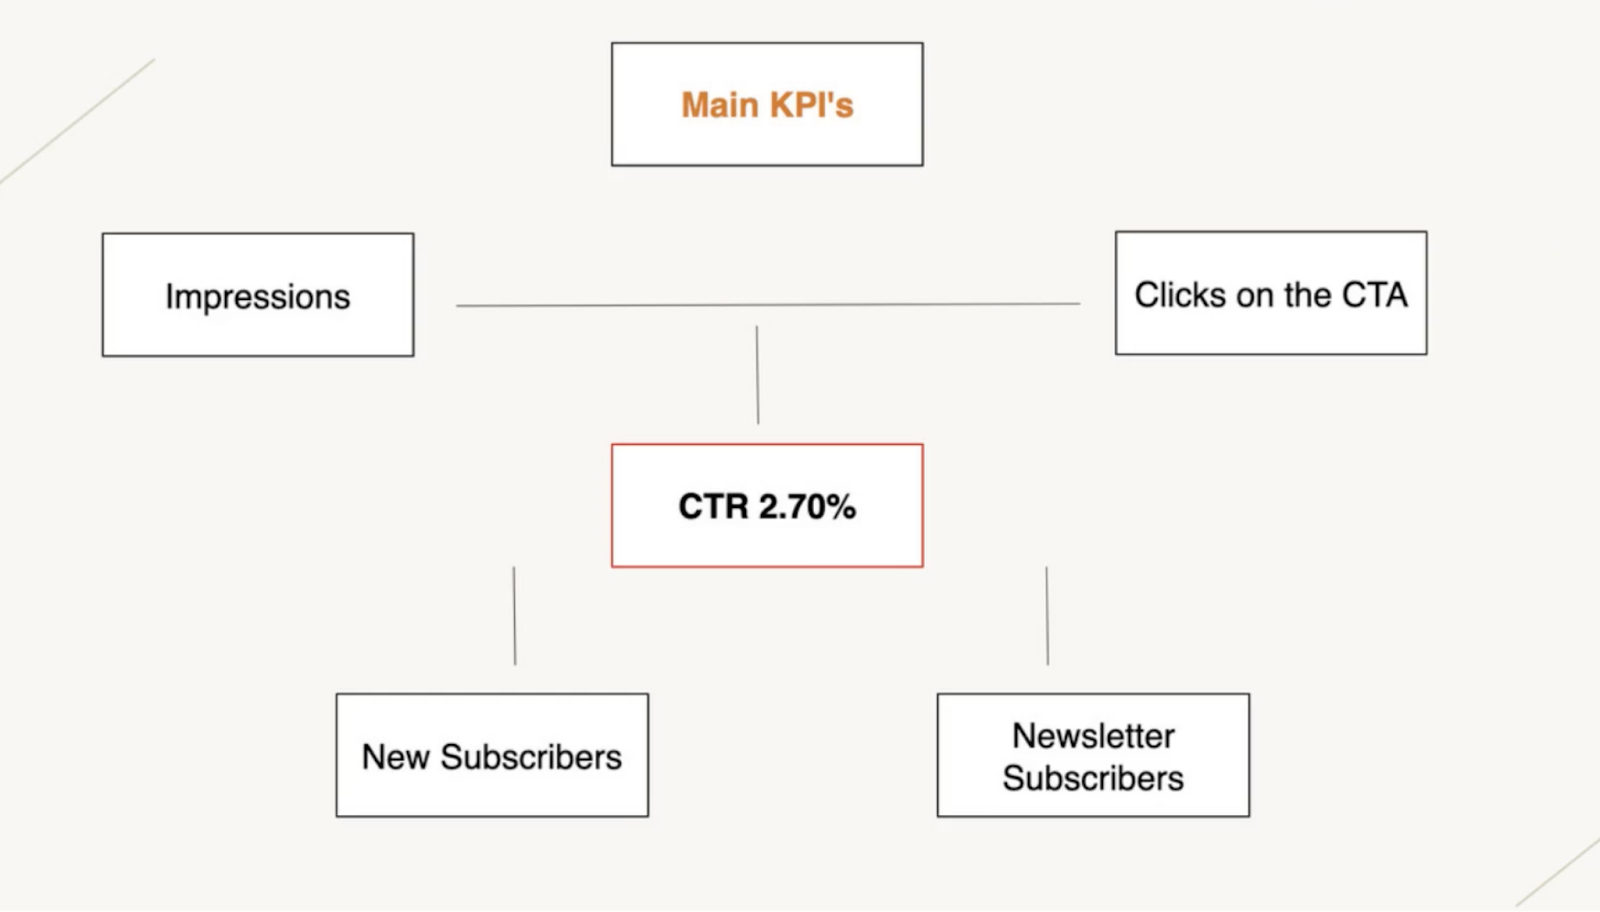 KPIs chosen for their newsletter wall and paywall strategies